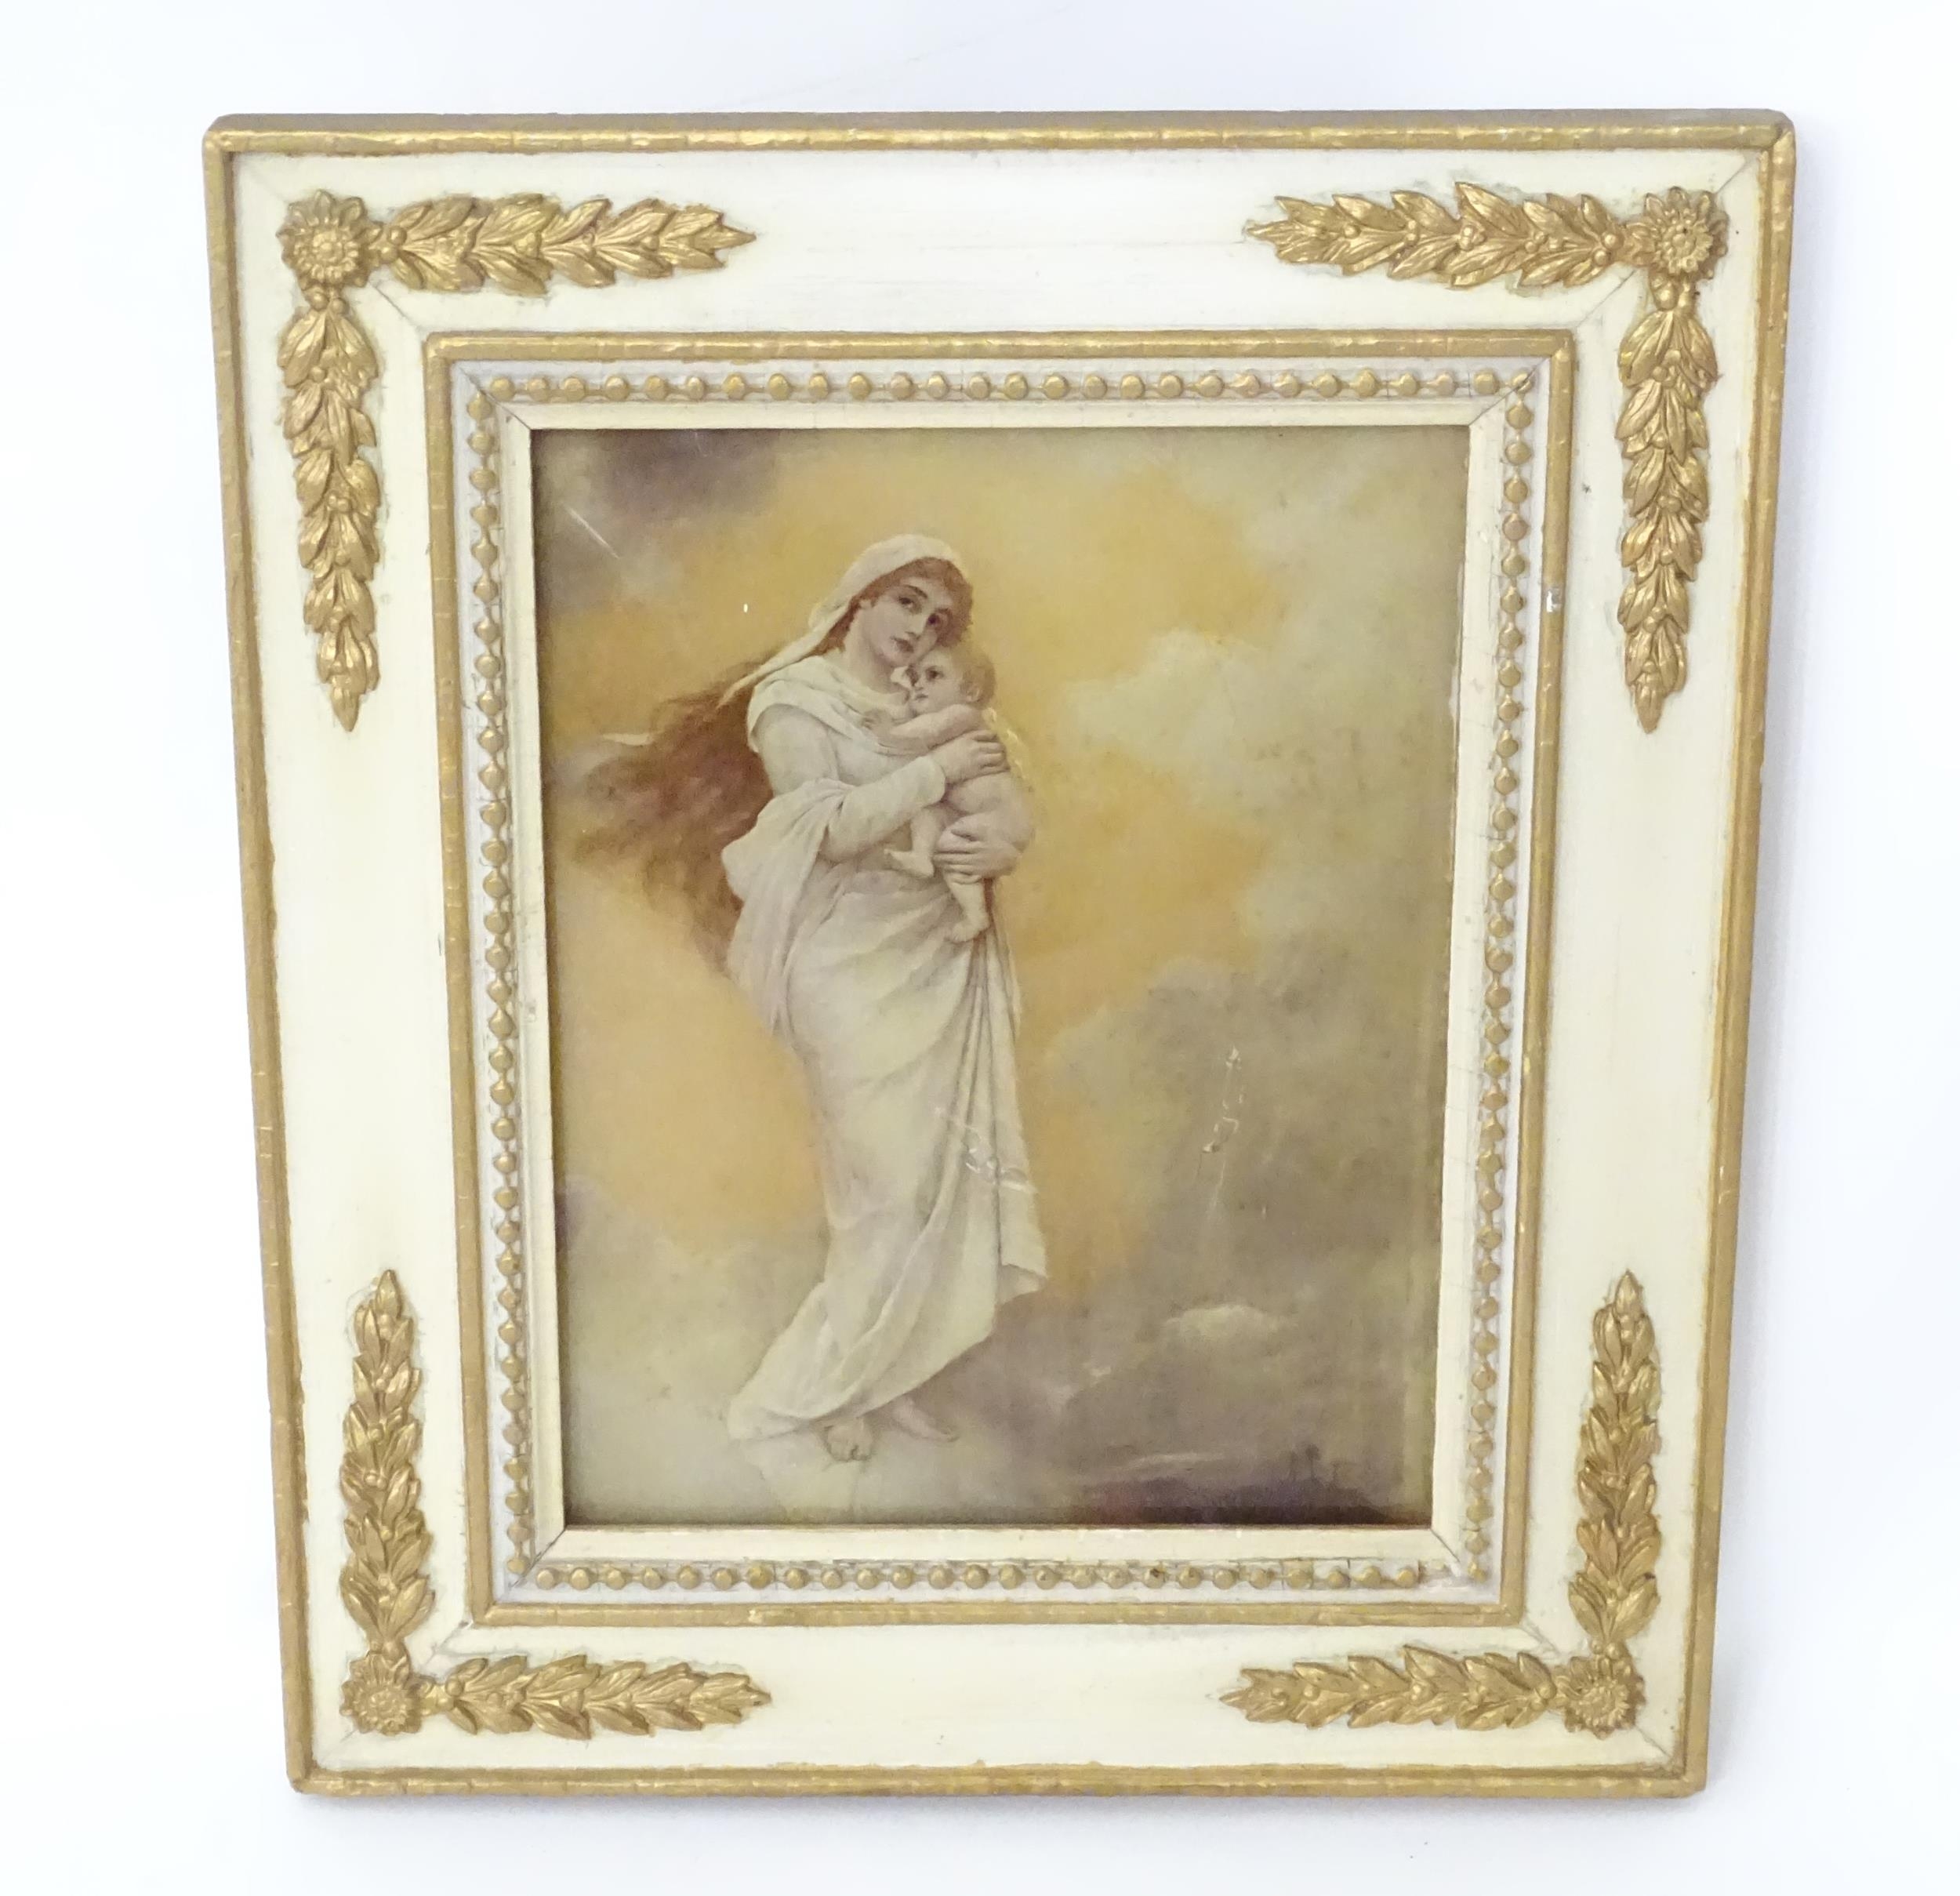 A 20thC crystoleum print depicting Madonna and Child after Cuno von Bodenhausen. Approx. 12" x 10" - Image 3 of 6